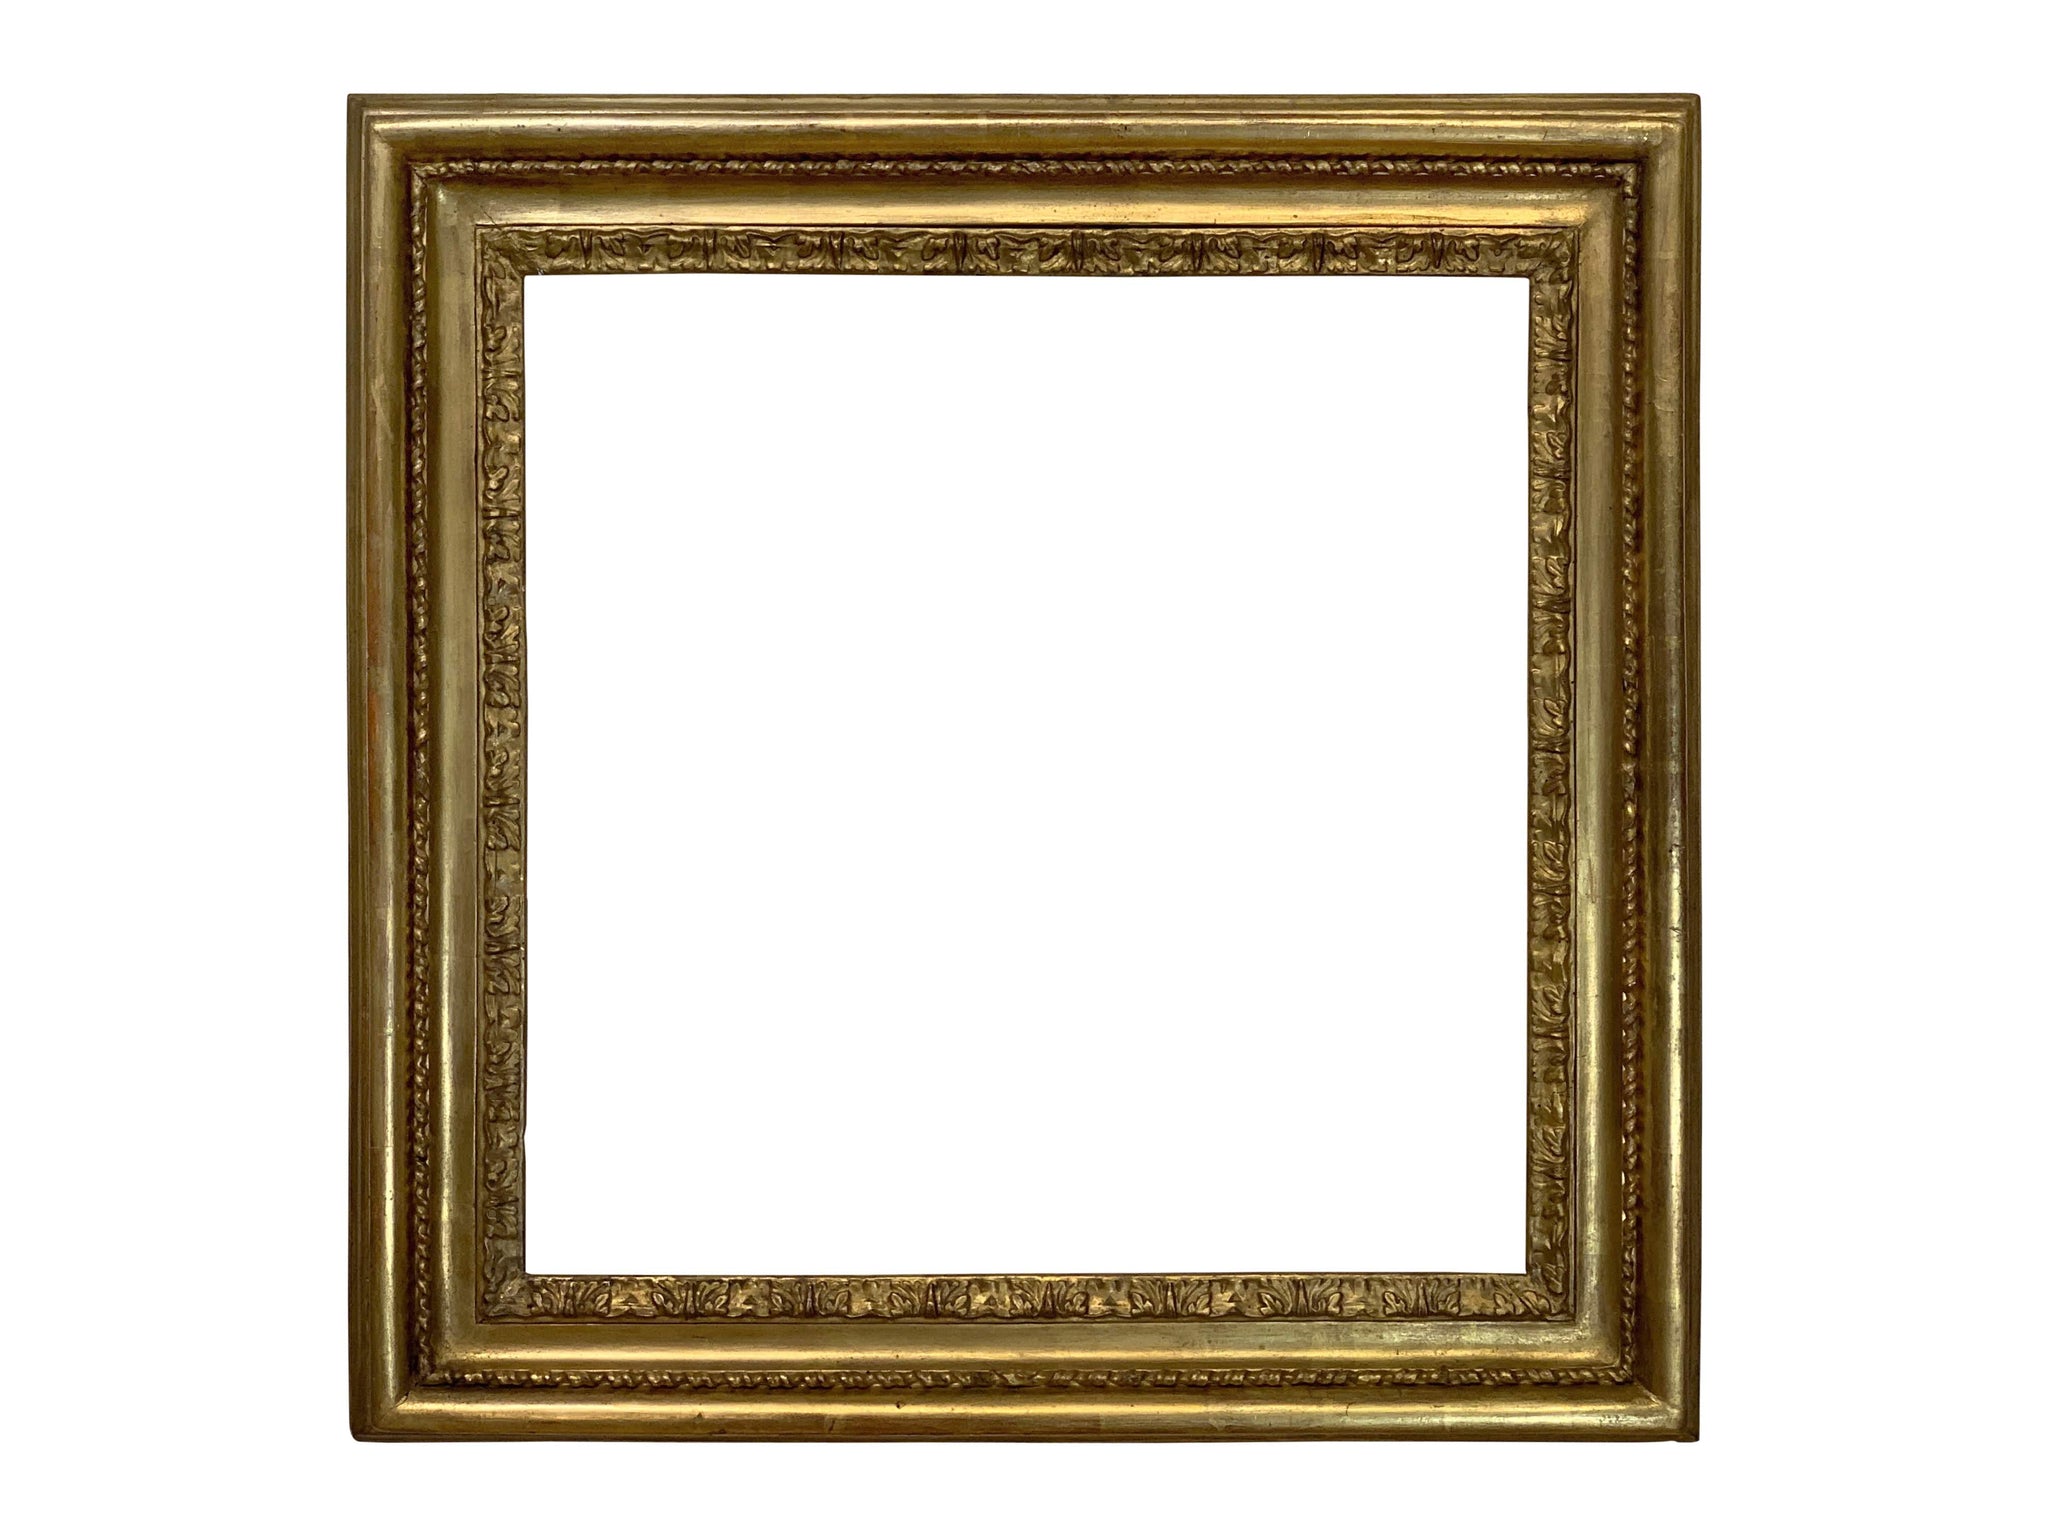 26x26 inch Antique Square Gold Picture Frame For Canvas Art circa 1900s (20th Century).